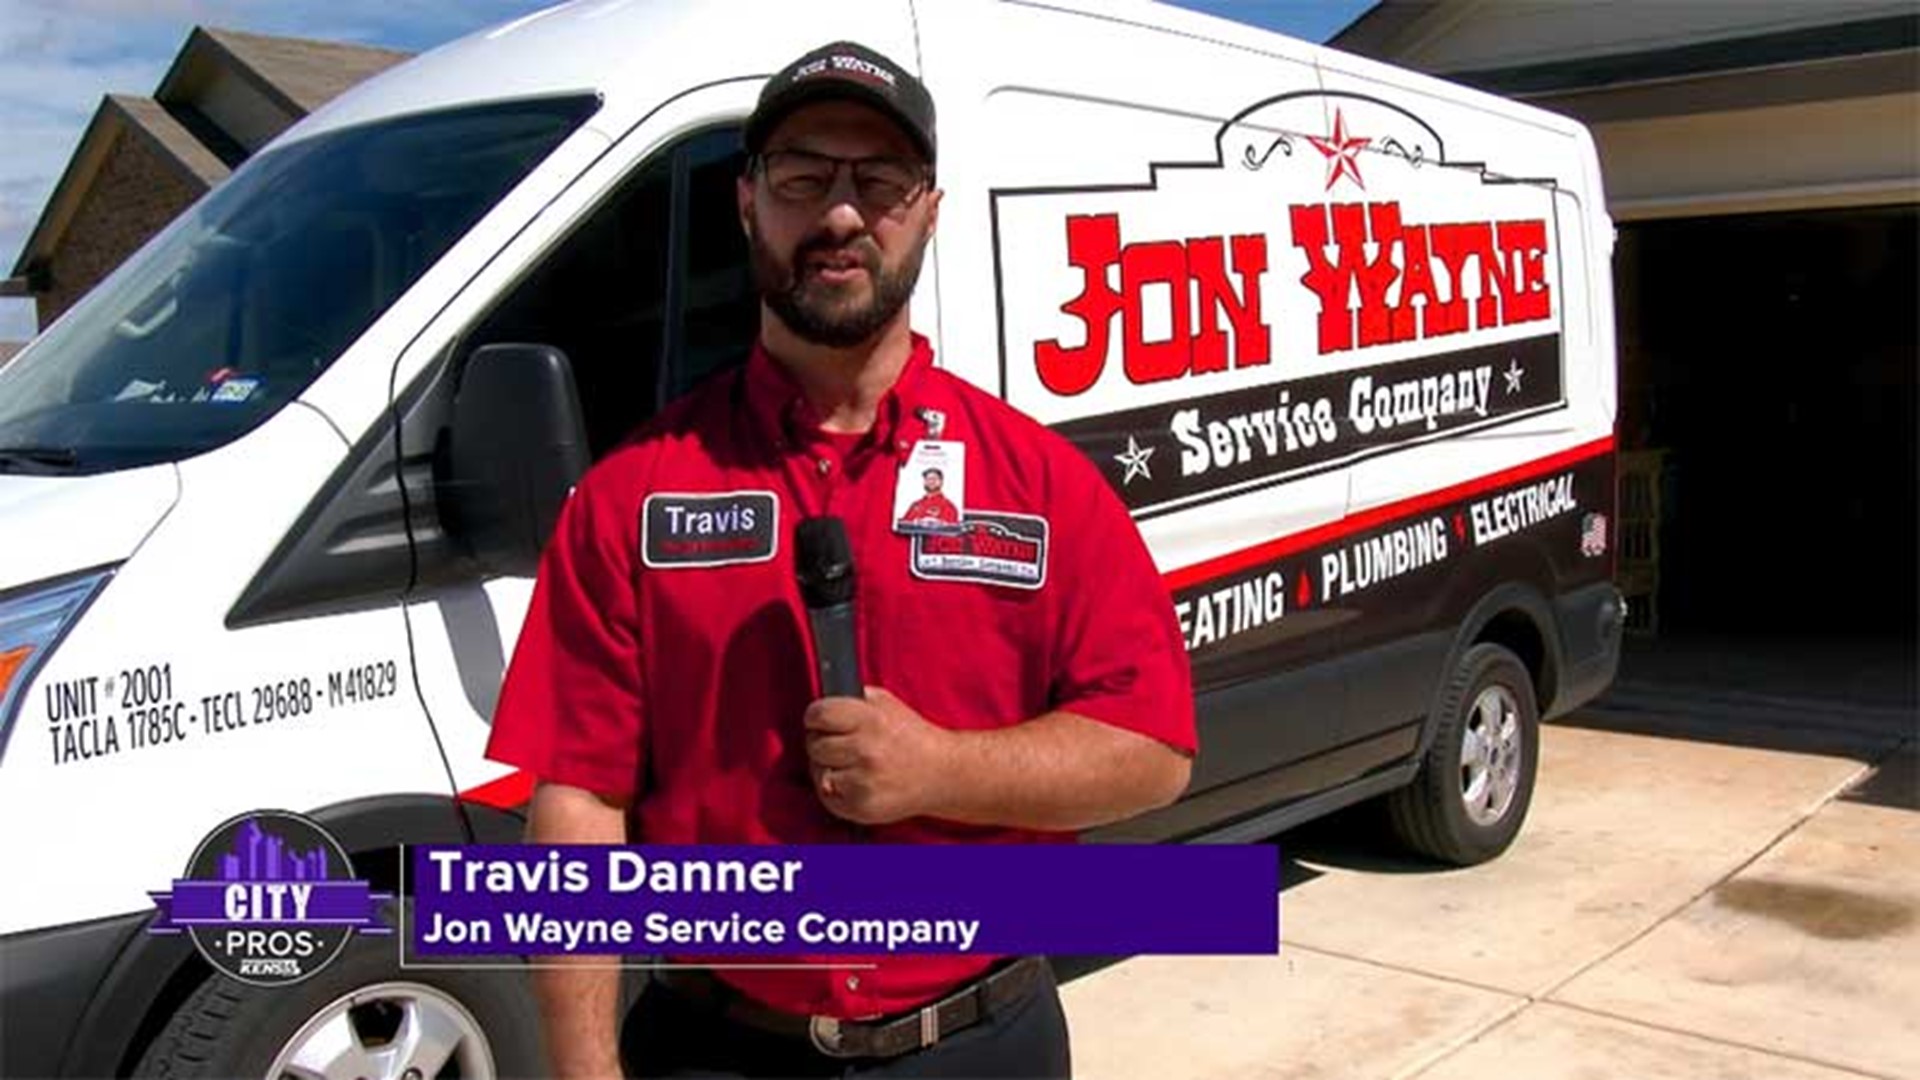 Jon Wayne can install a four-stage indoor quality system to make your home cleaner and more efficient.